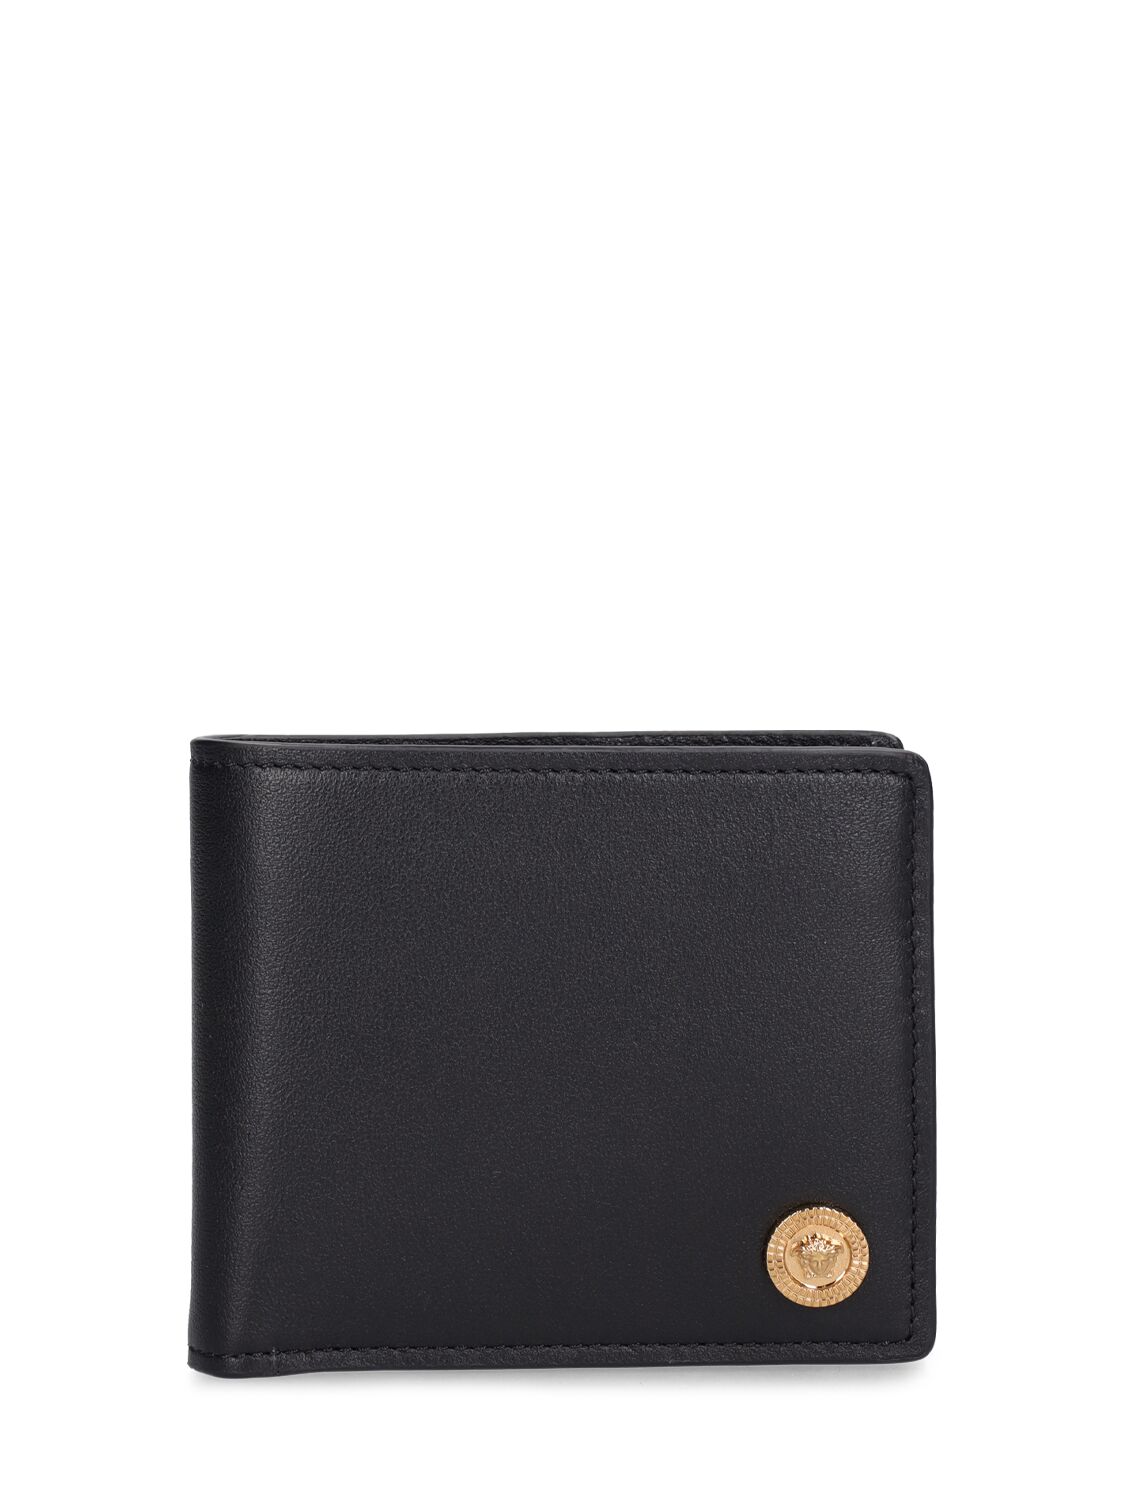 Leather Coin Pocket Wallet